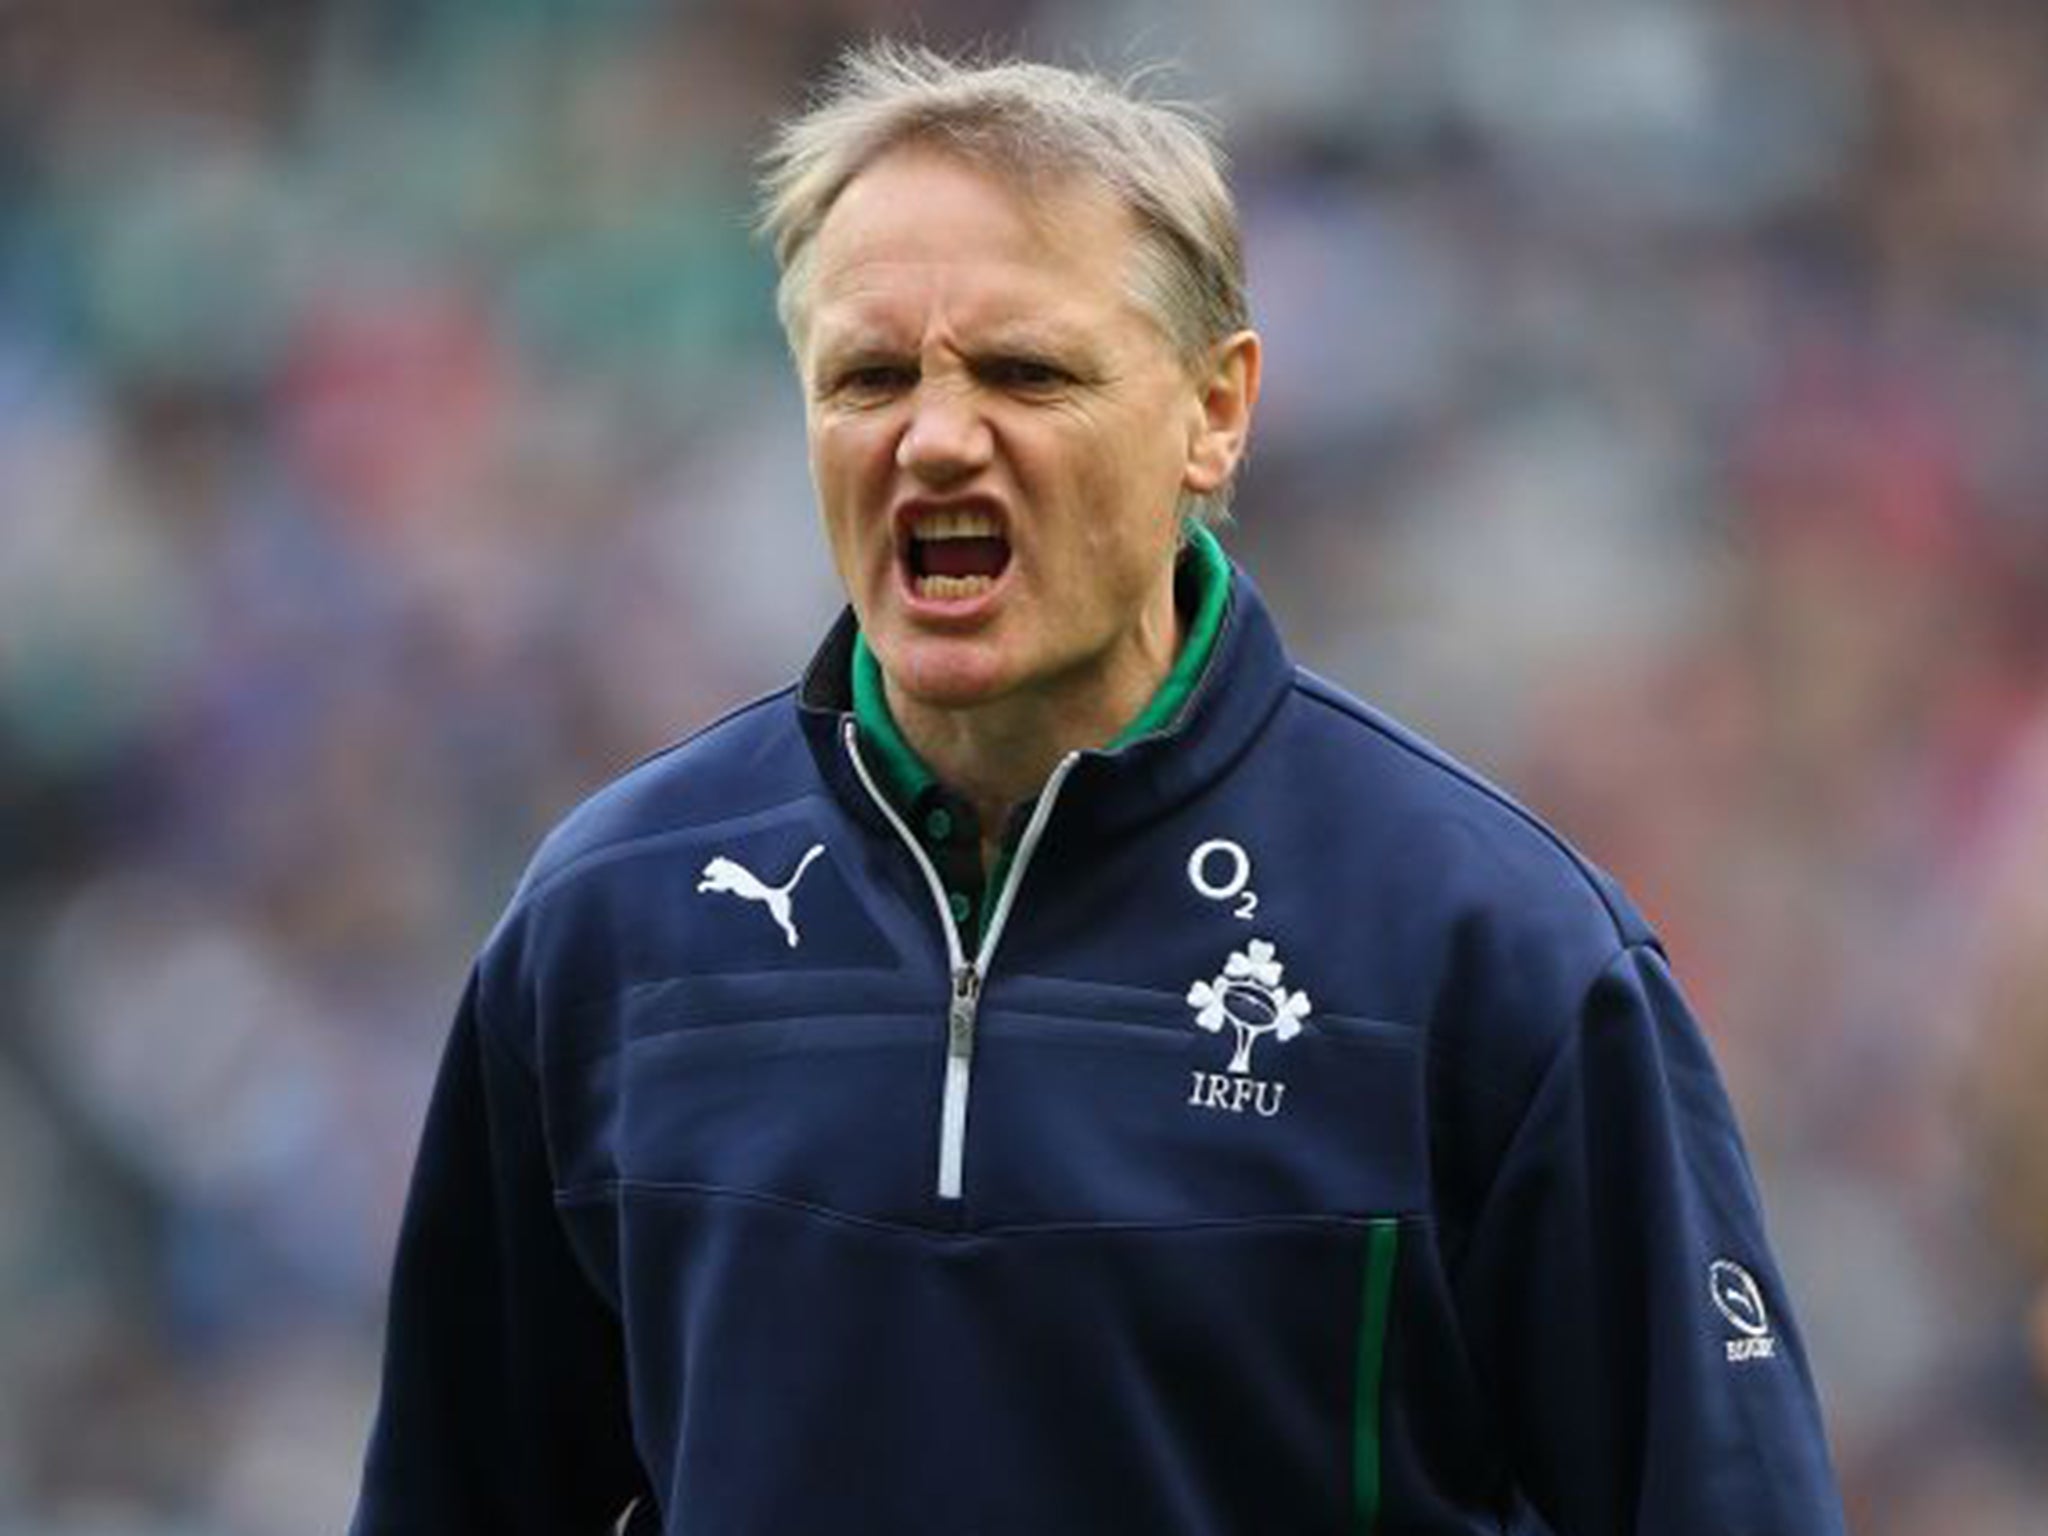 Joe Schmidt’s Ireland will be very well prepared to defend their title